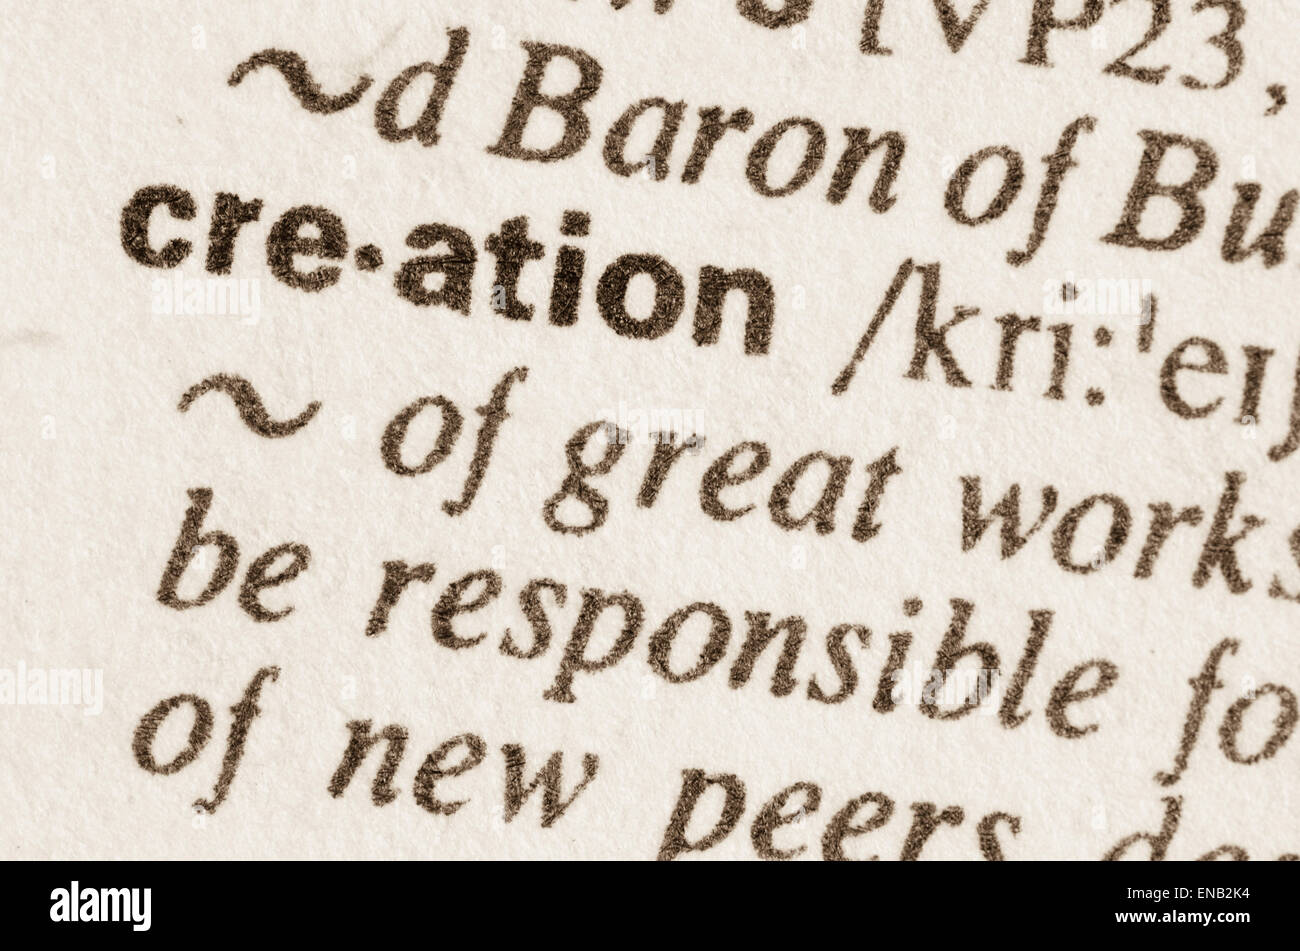 Definition of word creation in dictionary Stock Photo